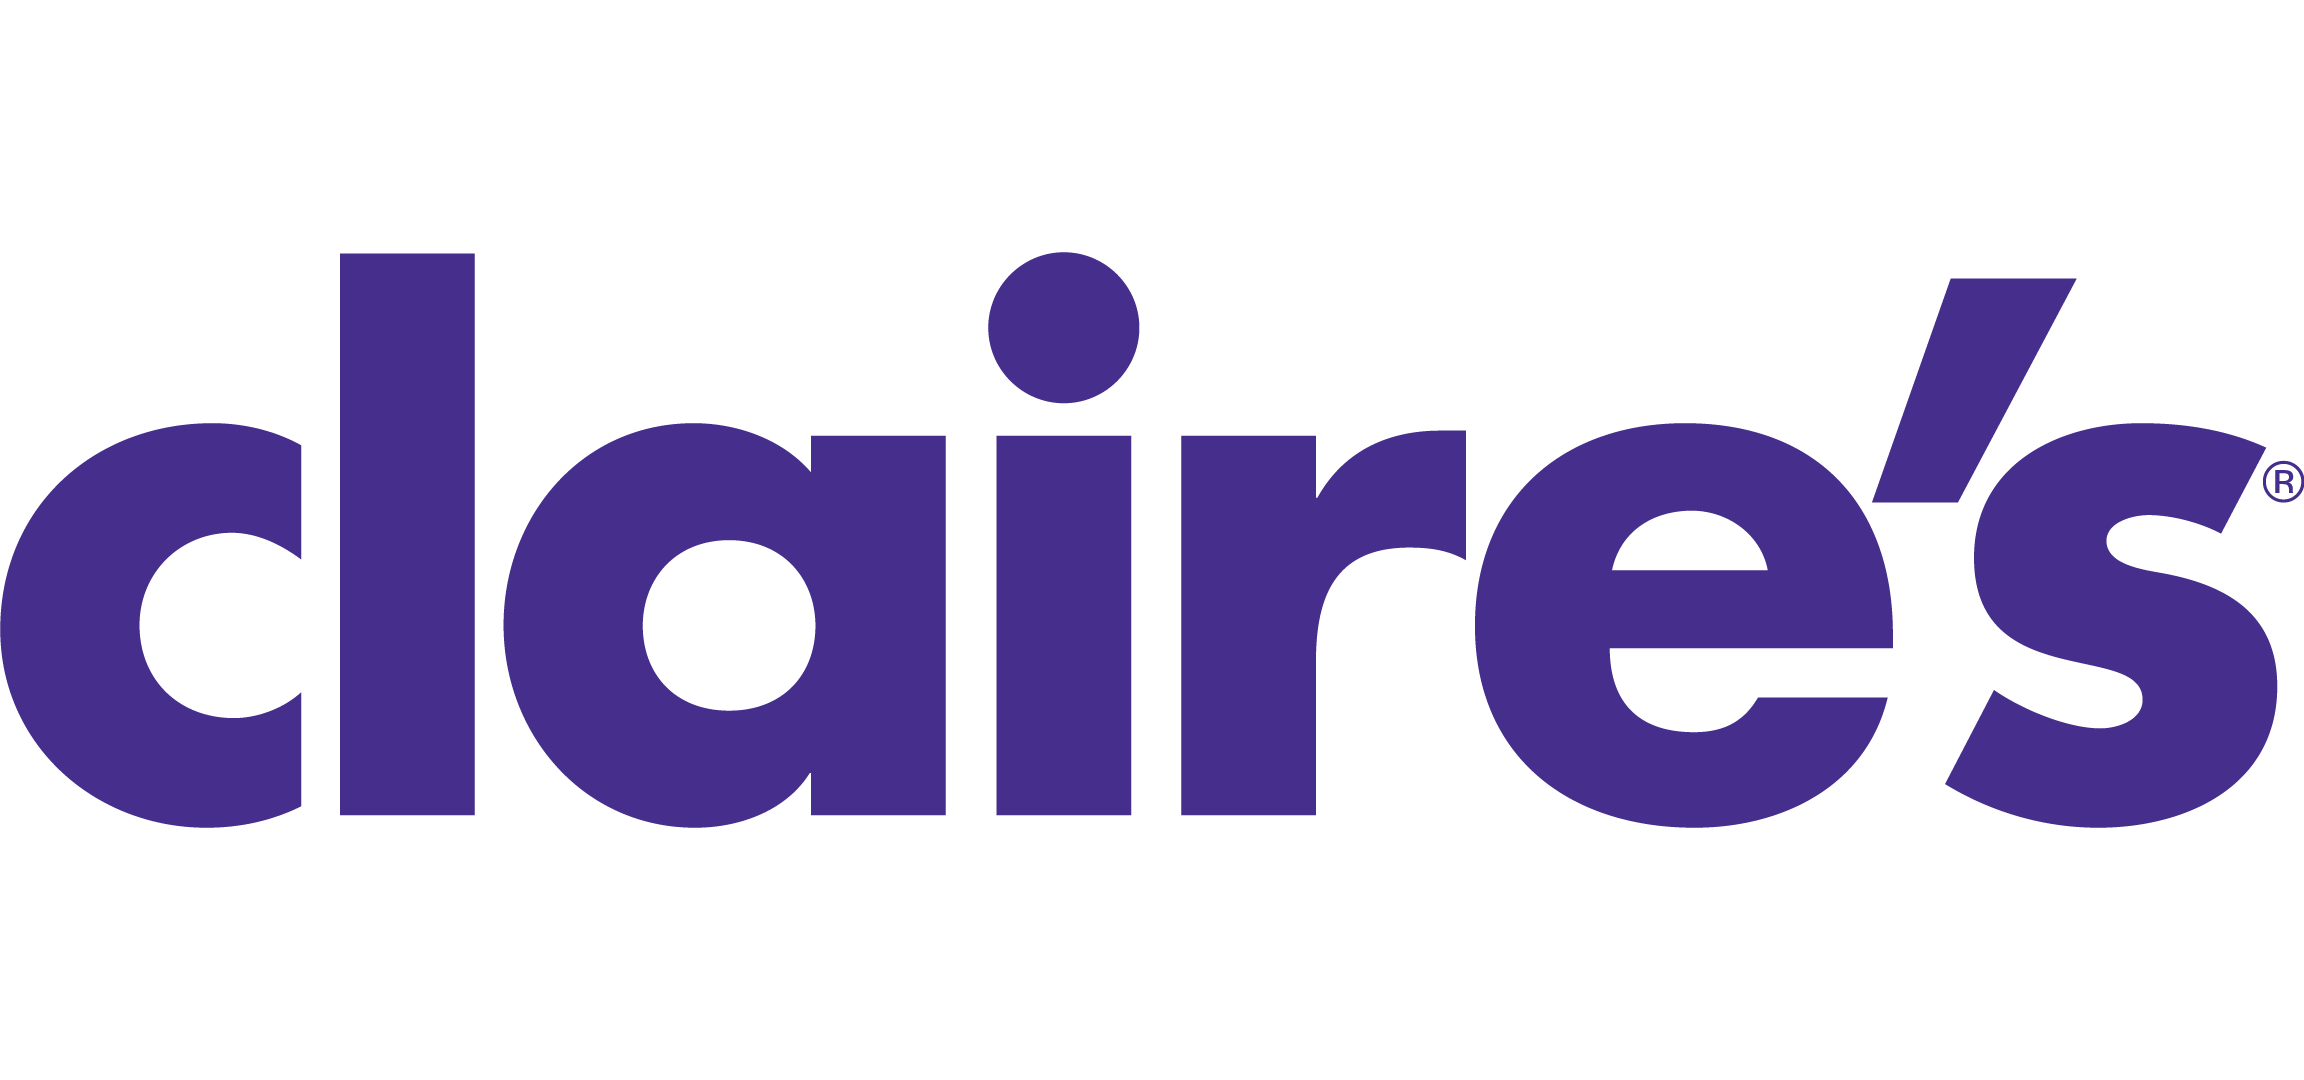 Claires careers.com